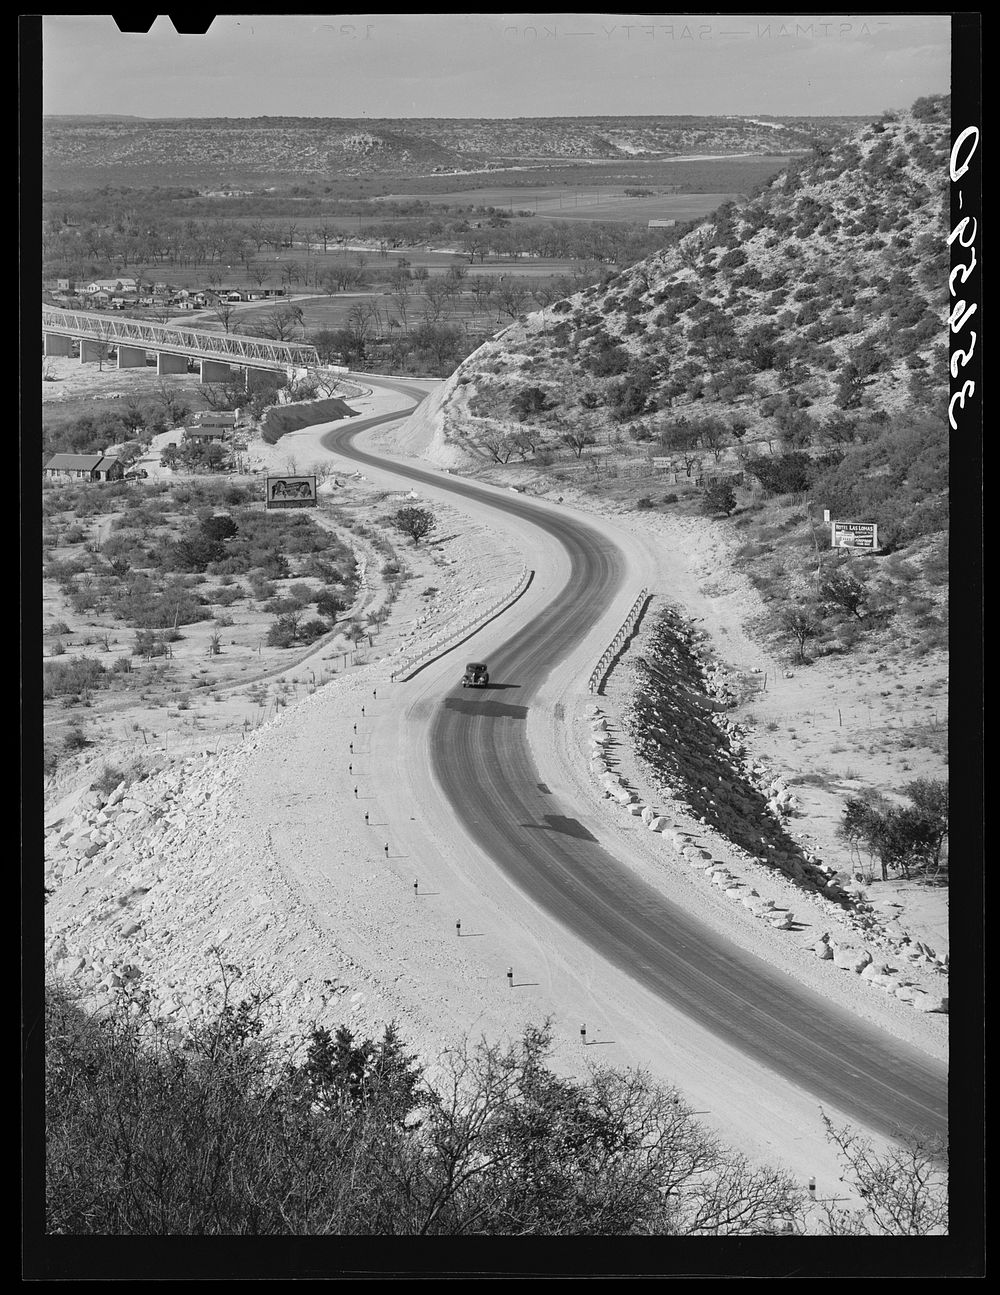 [Untitled photo, possibly related to: Highway leading into Junction, Texas, which is in the center of the goat and sheep…